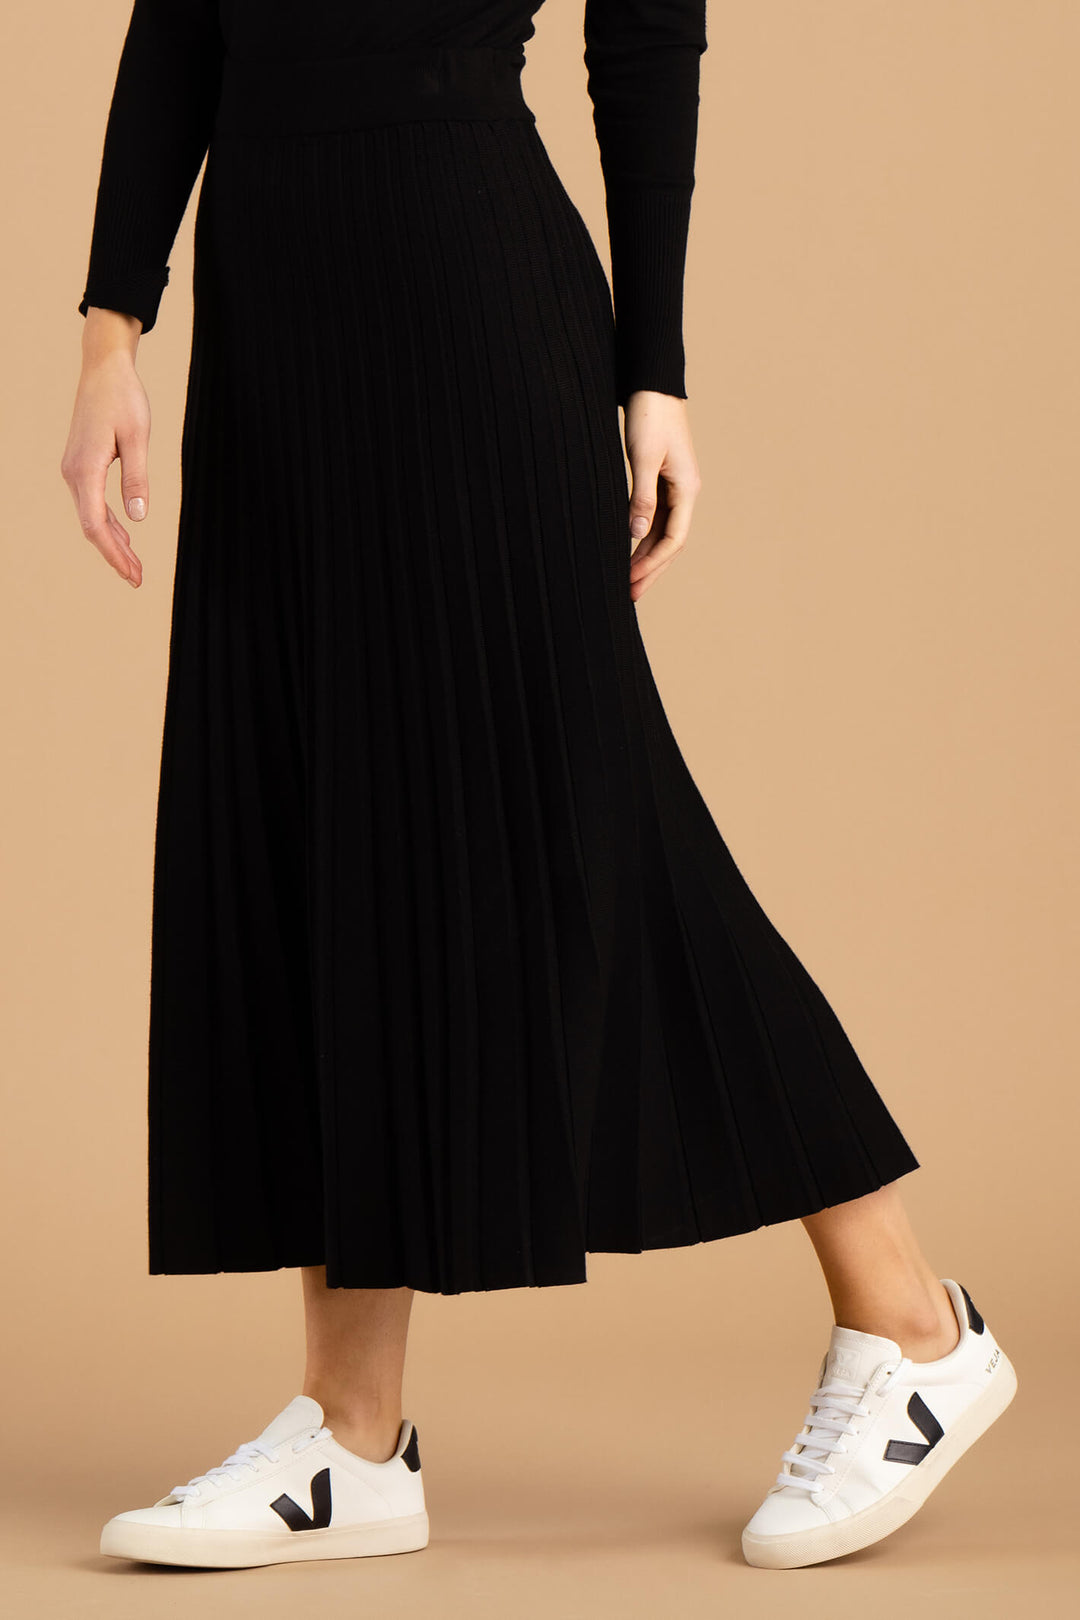 Marble Fashion 7123 101 Black Midi Pleated Skirt - Experience Boutique